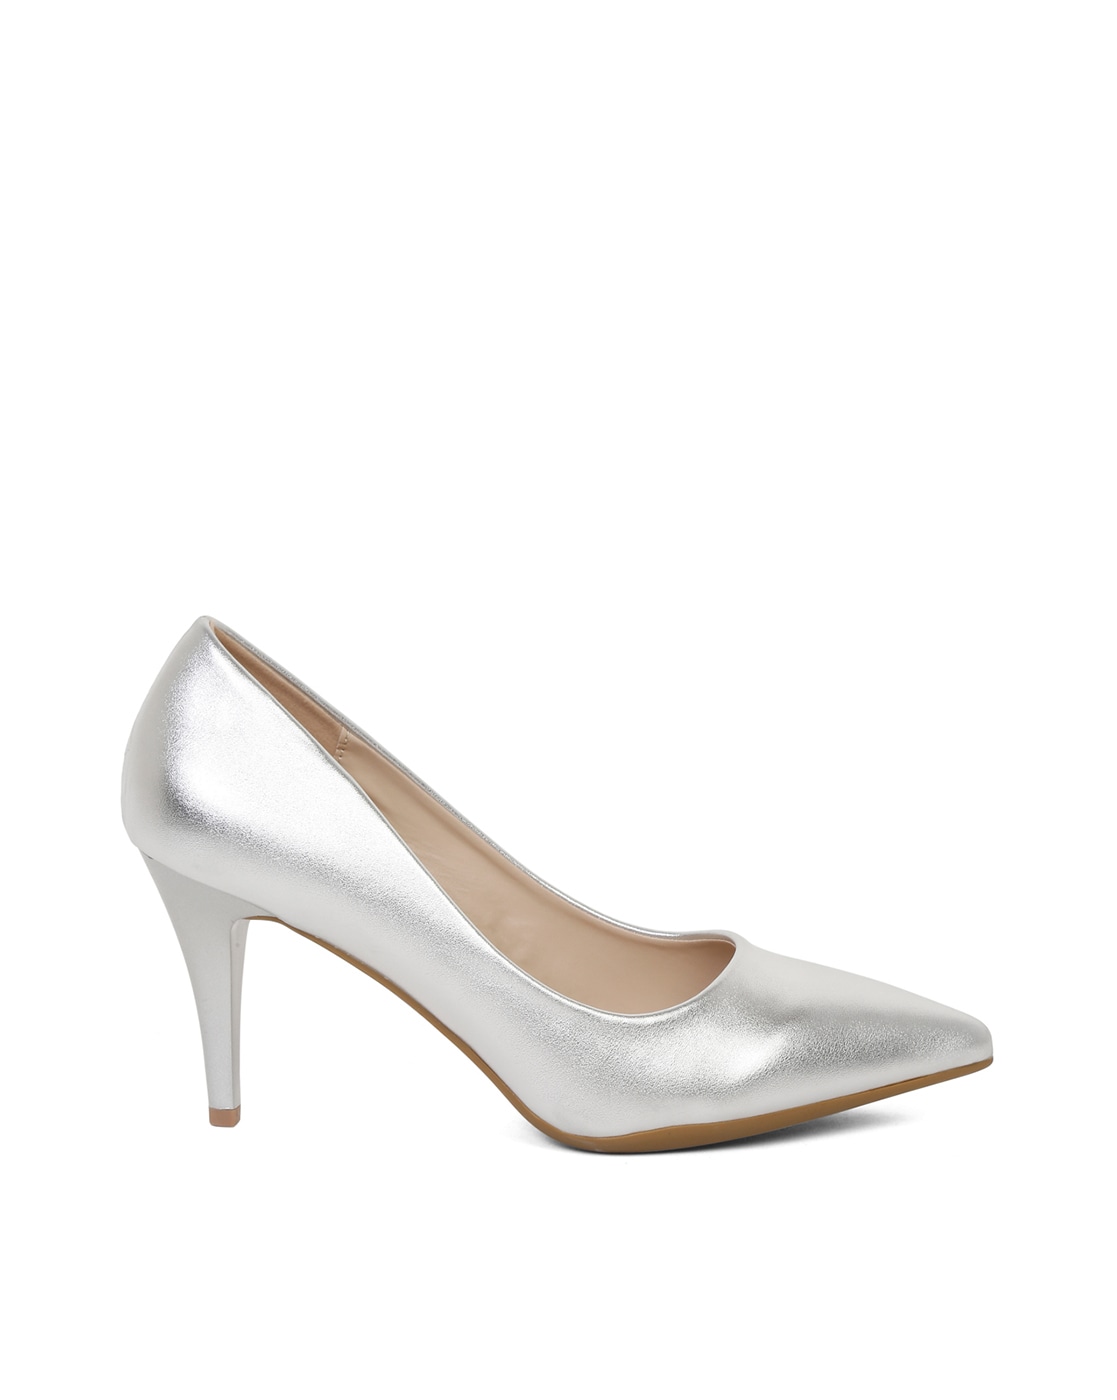 Metallic court shoes - Silver-coloured - Ladies | H&M IN